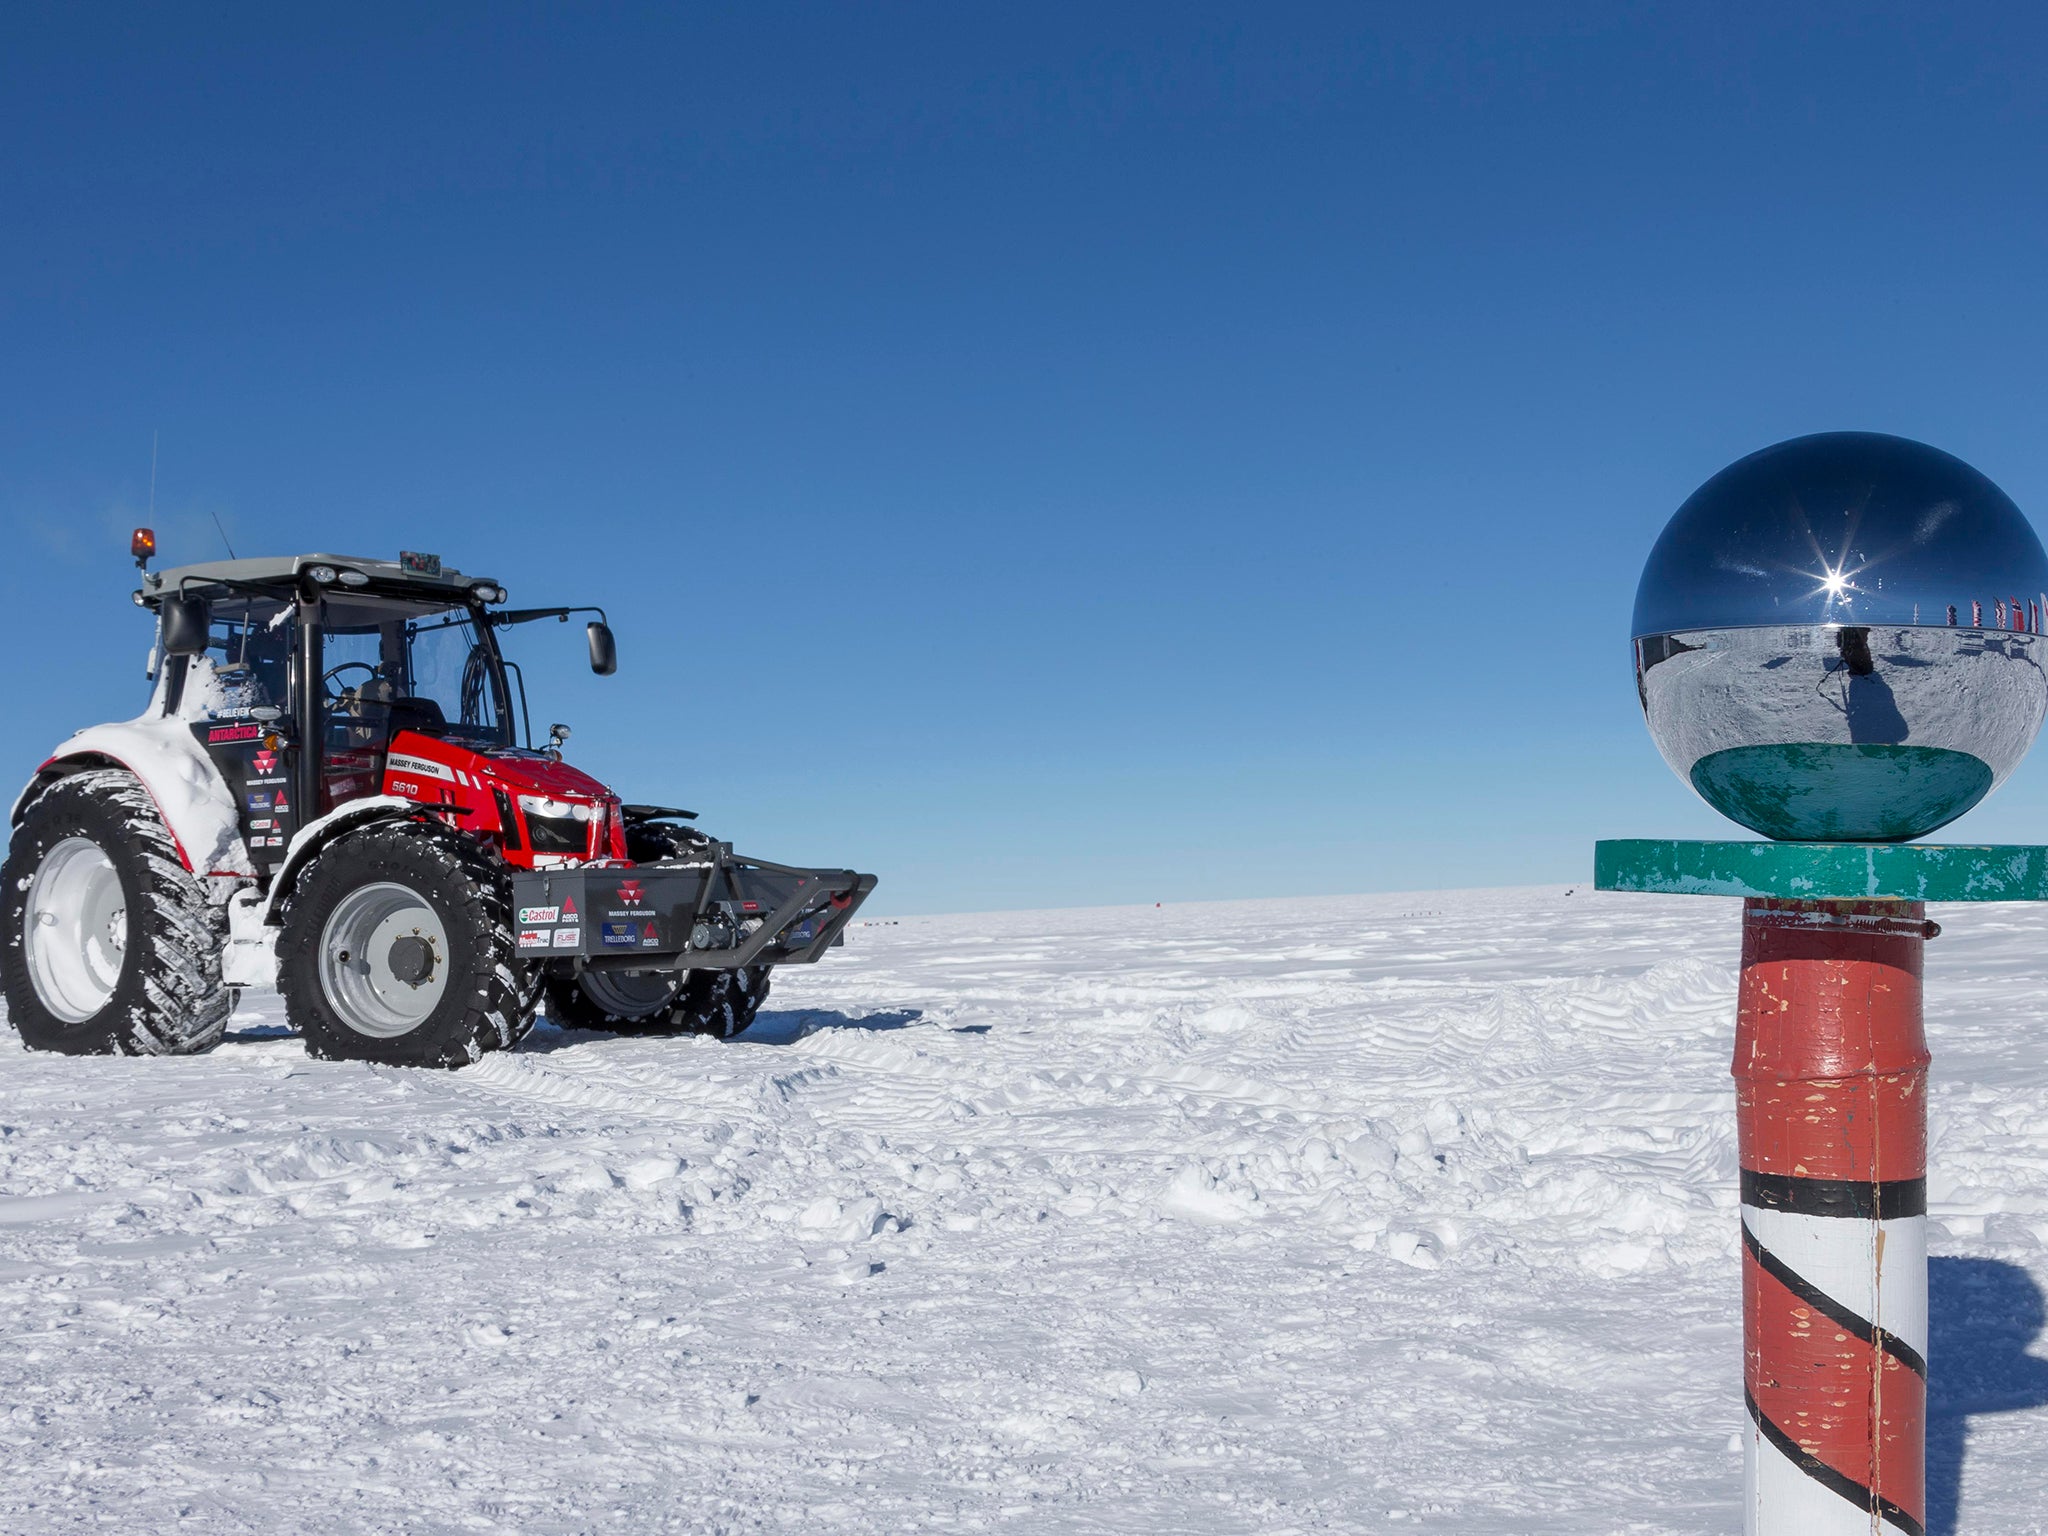 Manon Ossevoort, a Dutch actress and adventurer, has arrived at the South Pole after a 2,500 km journey across the ice of Antartica in a red Massey tractor.